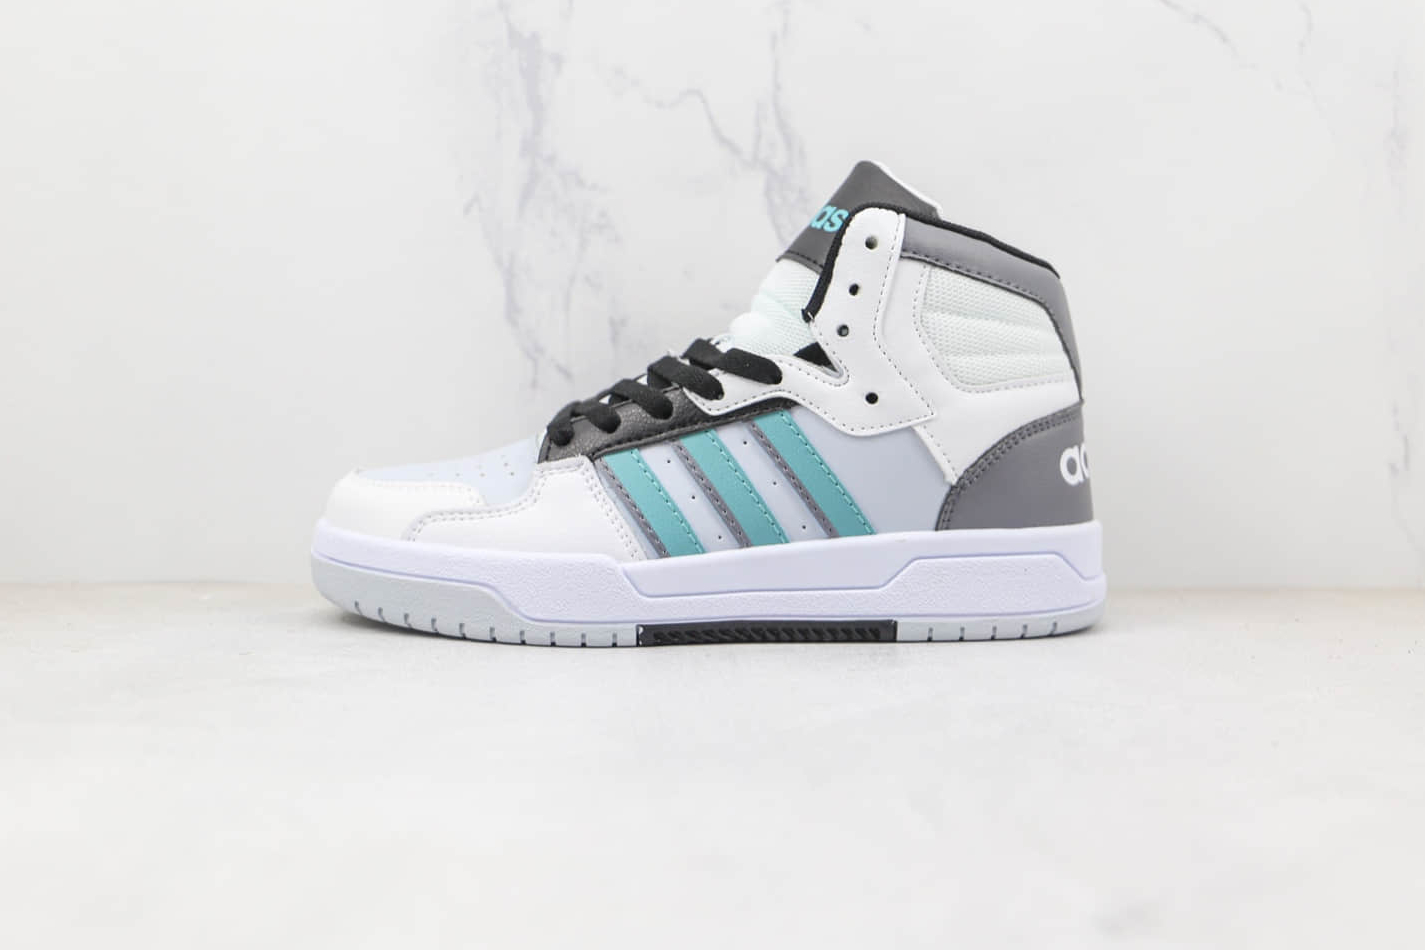 Adidas Neo Entrap Mid GX3794 - Stylish & Comfortable Sneakers